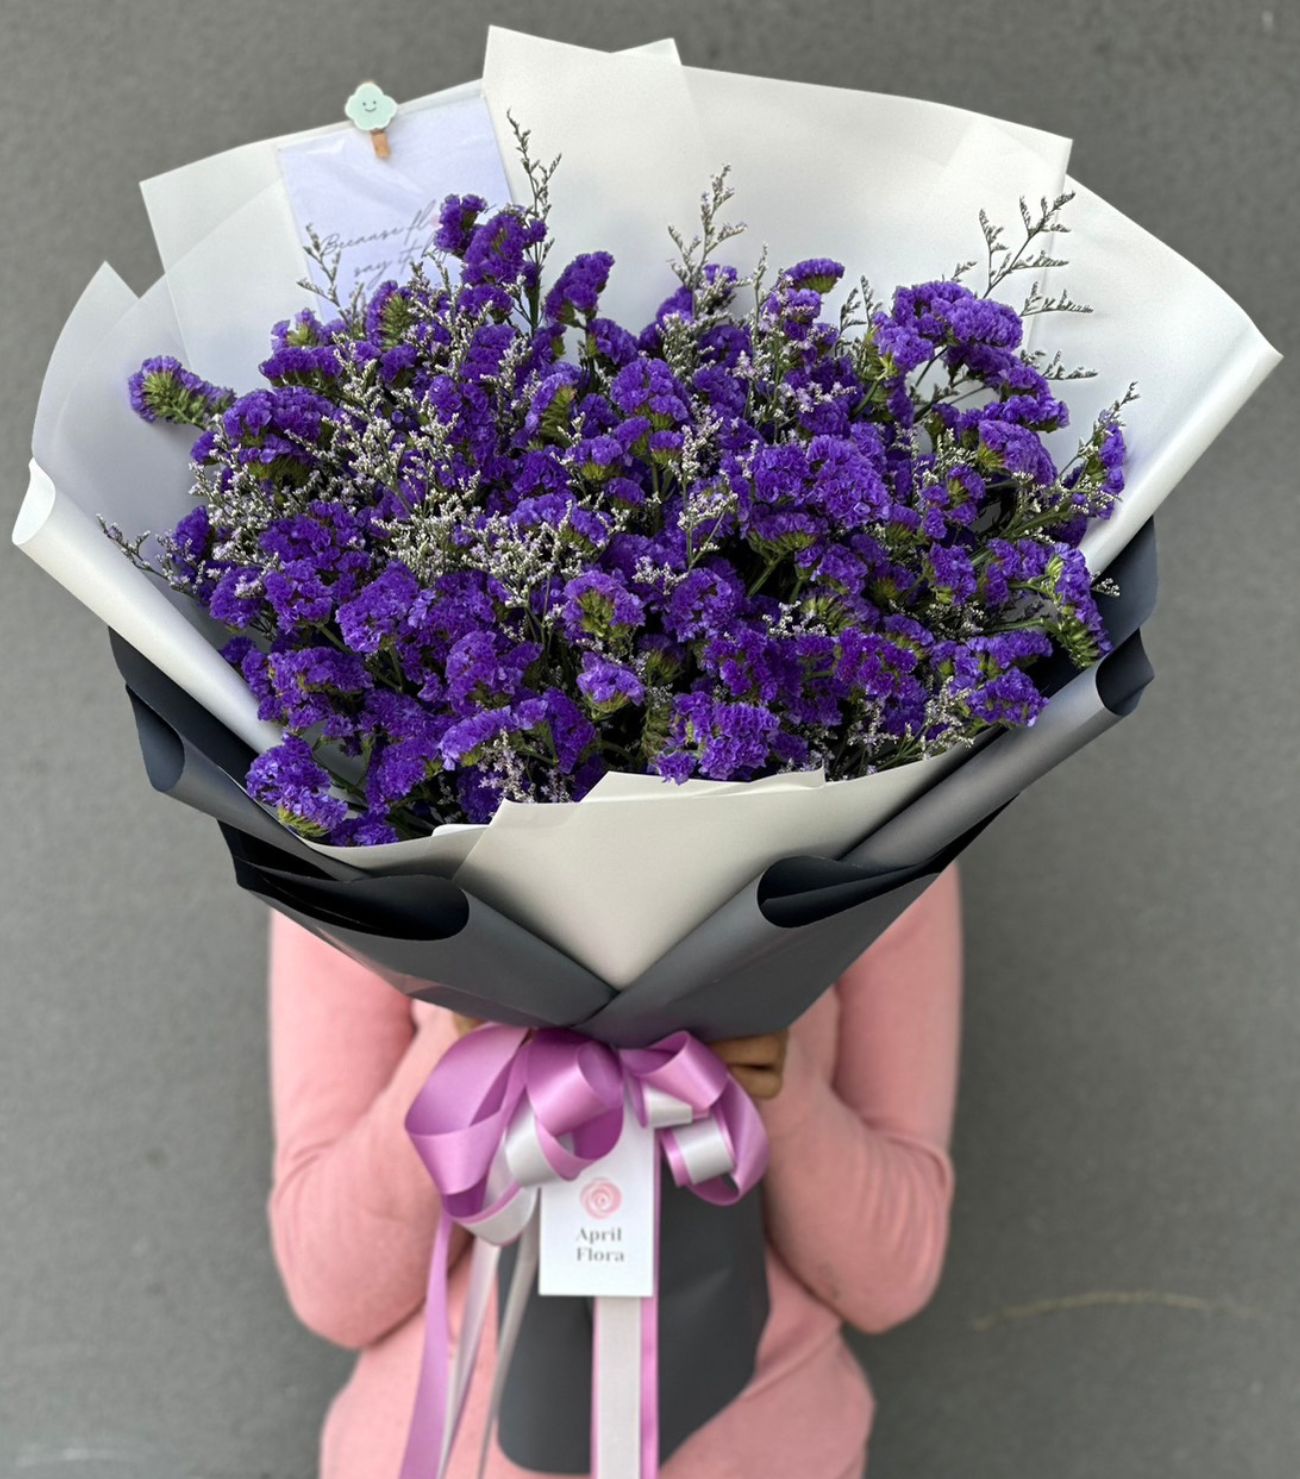 Stay Forever - bouquet of Statice flowers - April Flora